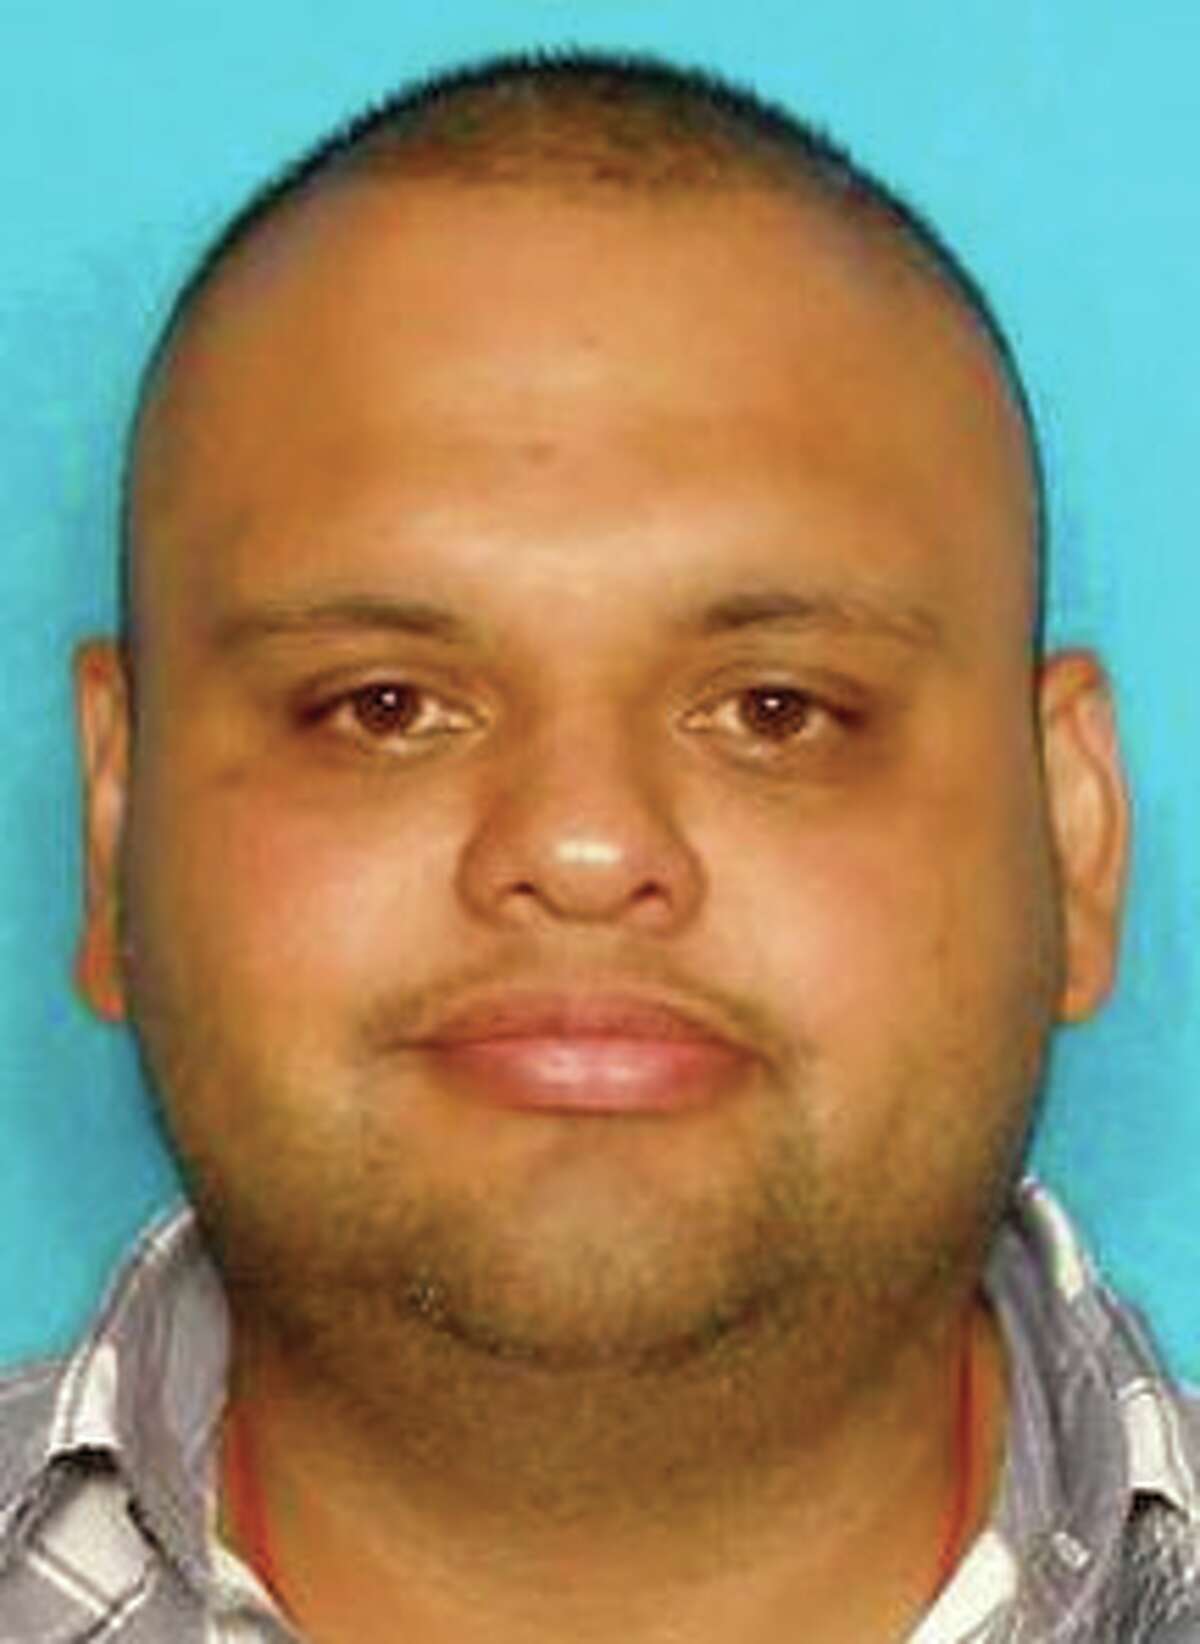 Edgar "Ewok" Hinojosa, a 39-year-old Gulf Cartel associate from Brownsville, was arrested March 15, 2016 in Matamoros, four years after he was convicted in U.S. federal court on drug conspiracy and possession charges.